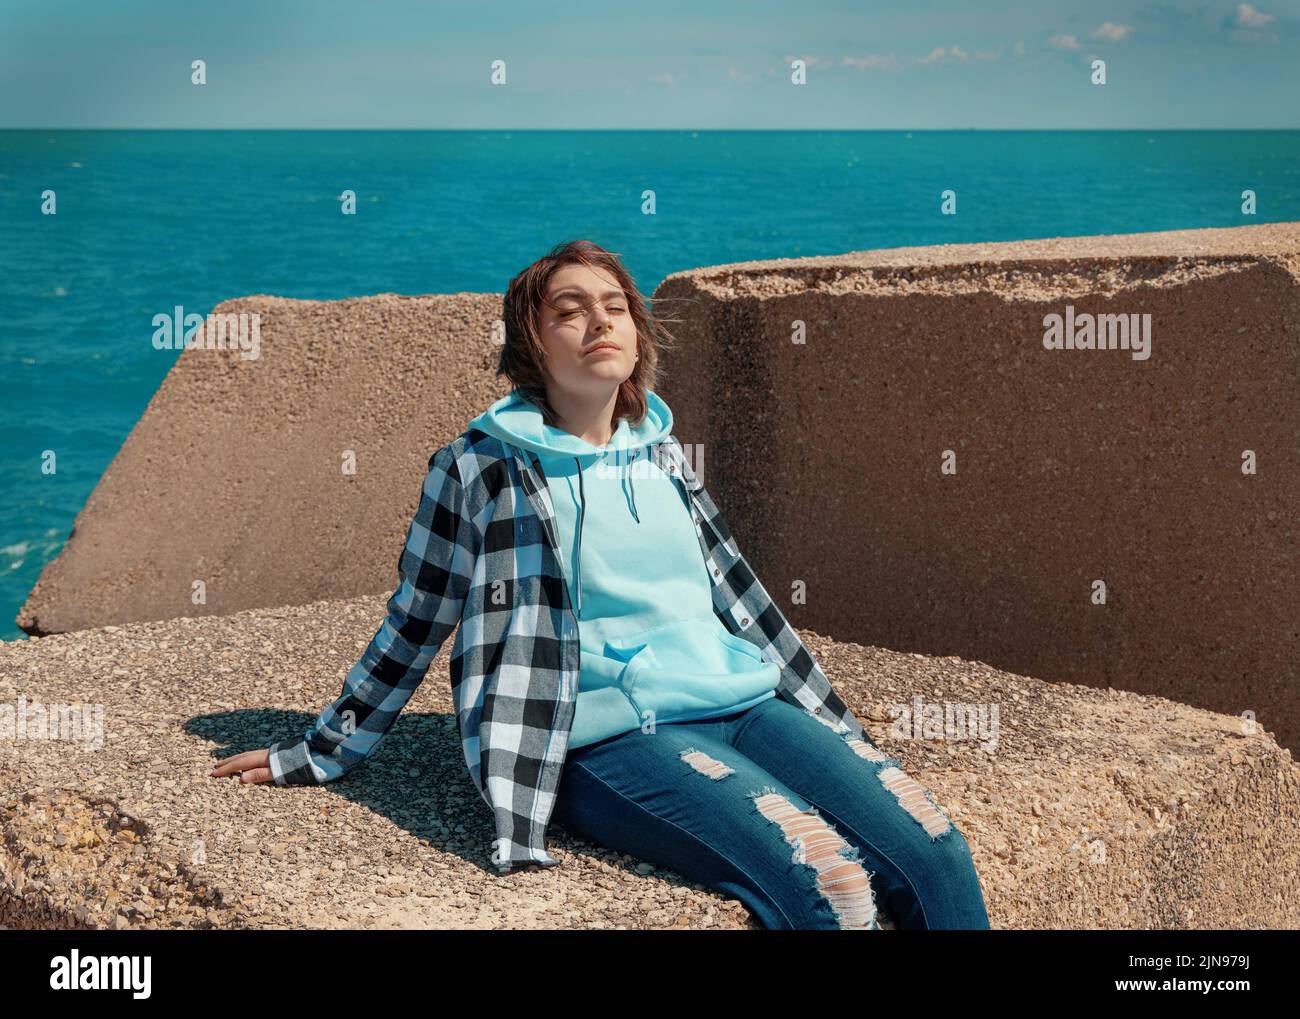 Relaxed Teenager girl in light blue hoodie and plaid shirt. Smiling Teen girl sitting outdoor and enjoying the sunny day. Adolescence concept Stock Photo